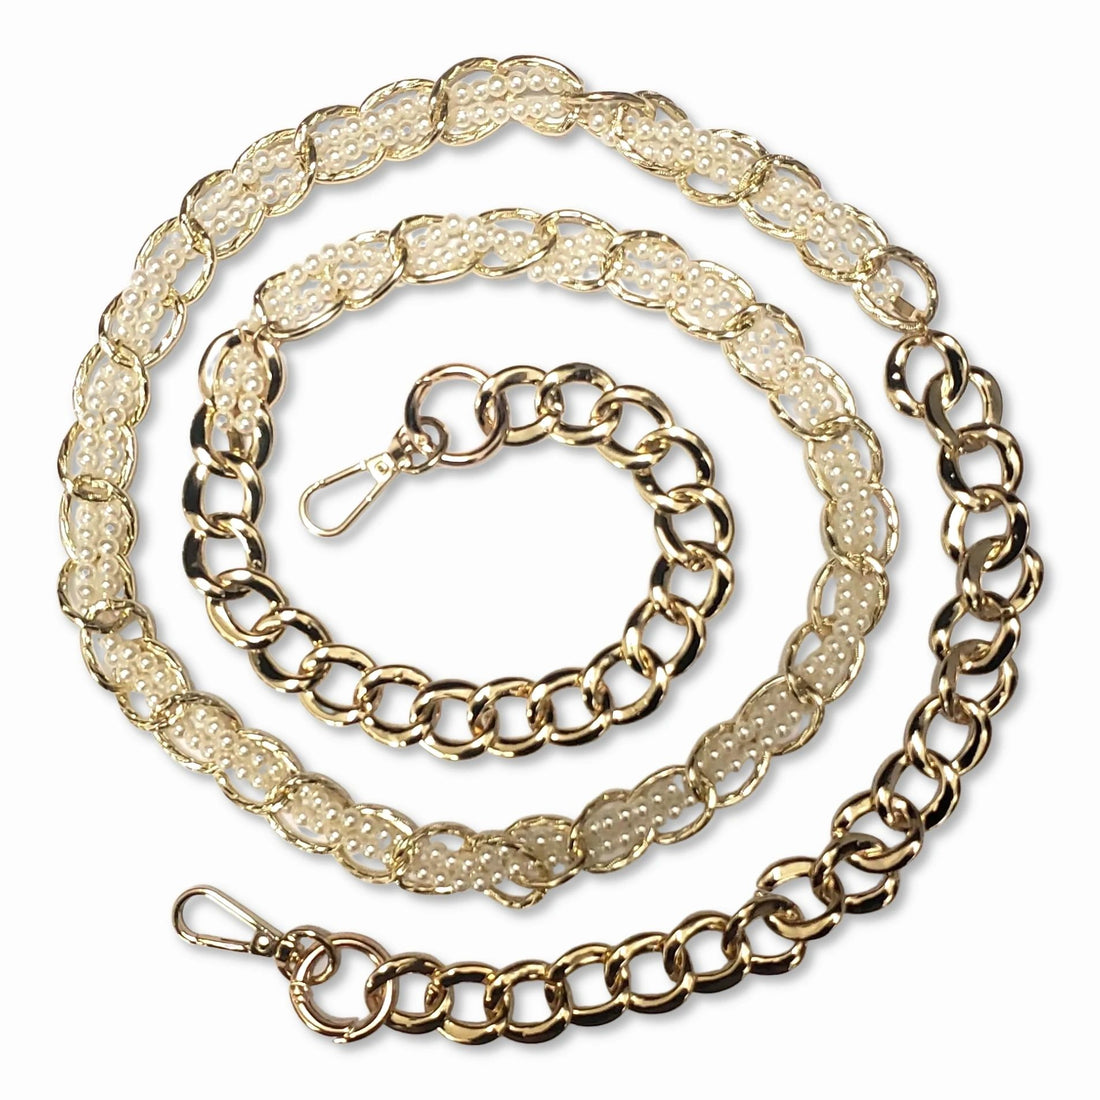 Rosalind - Pearl and Metal Chain with Golden Carabiners